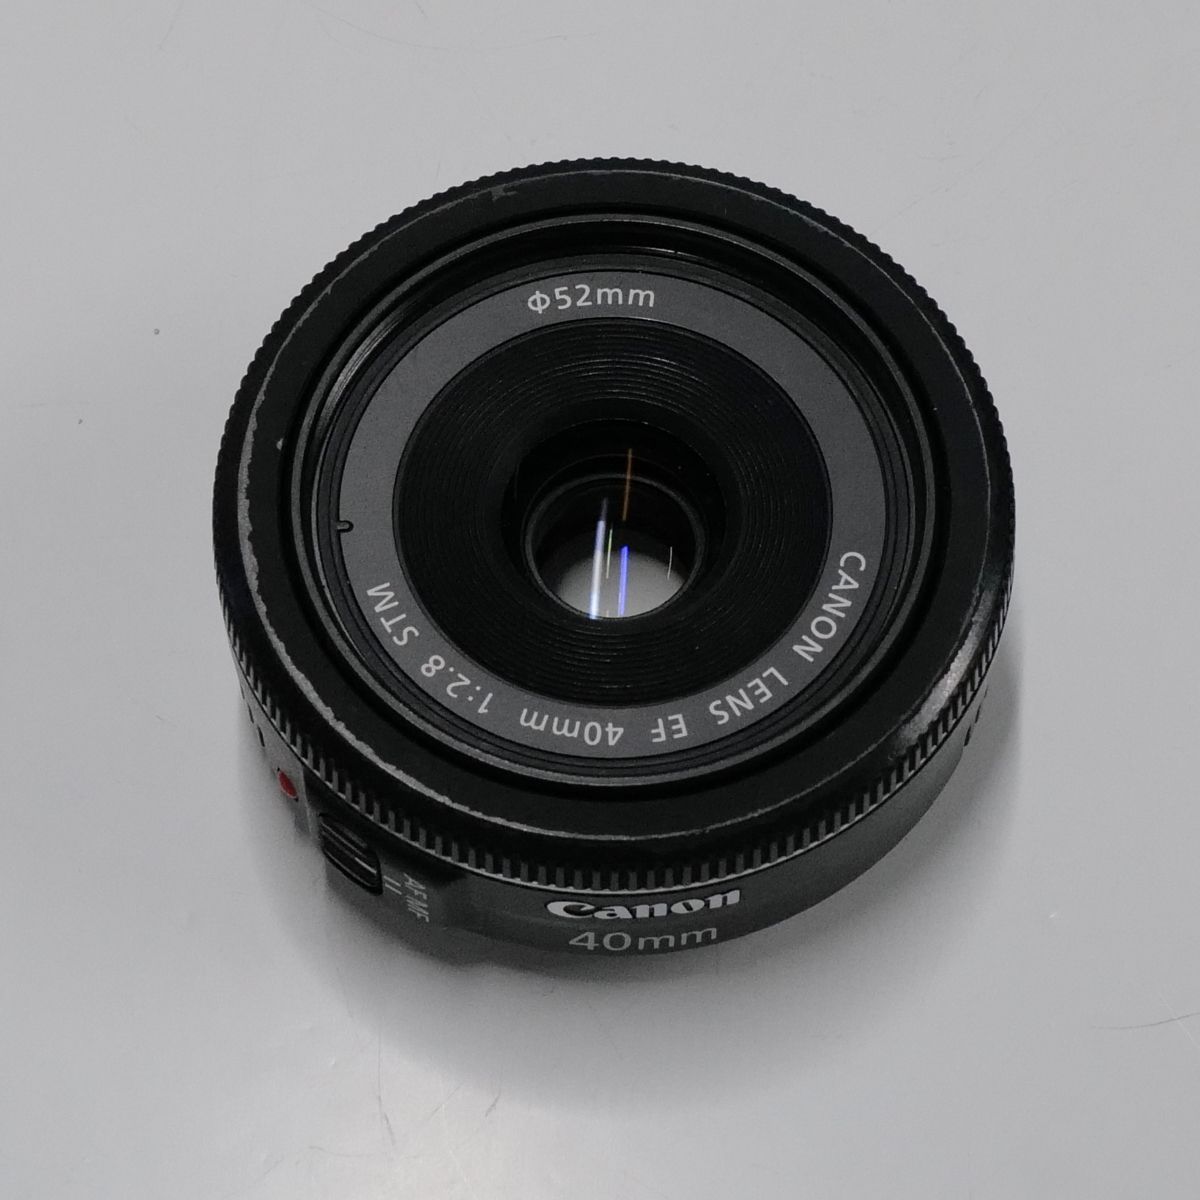 EF40mm F2.8 STM CANON 交換レンズ USED美品 標準 単焦点 パンケーキ 